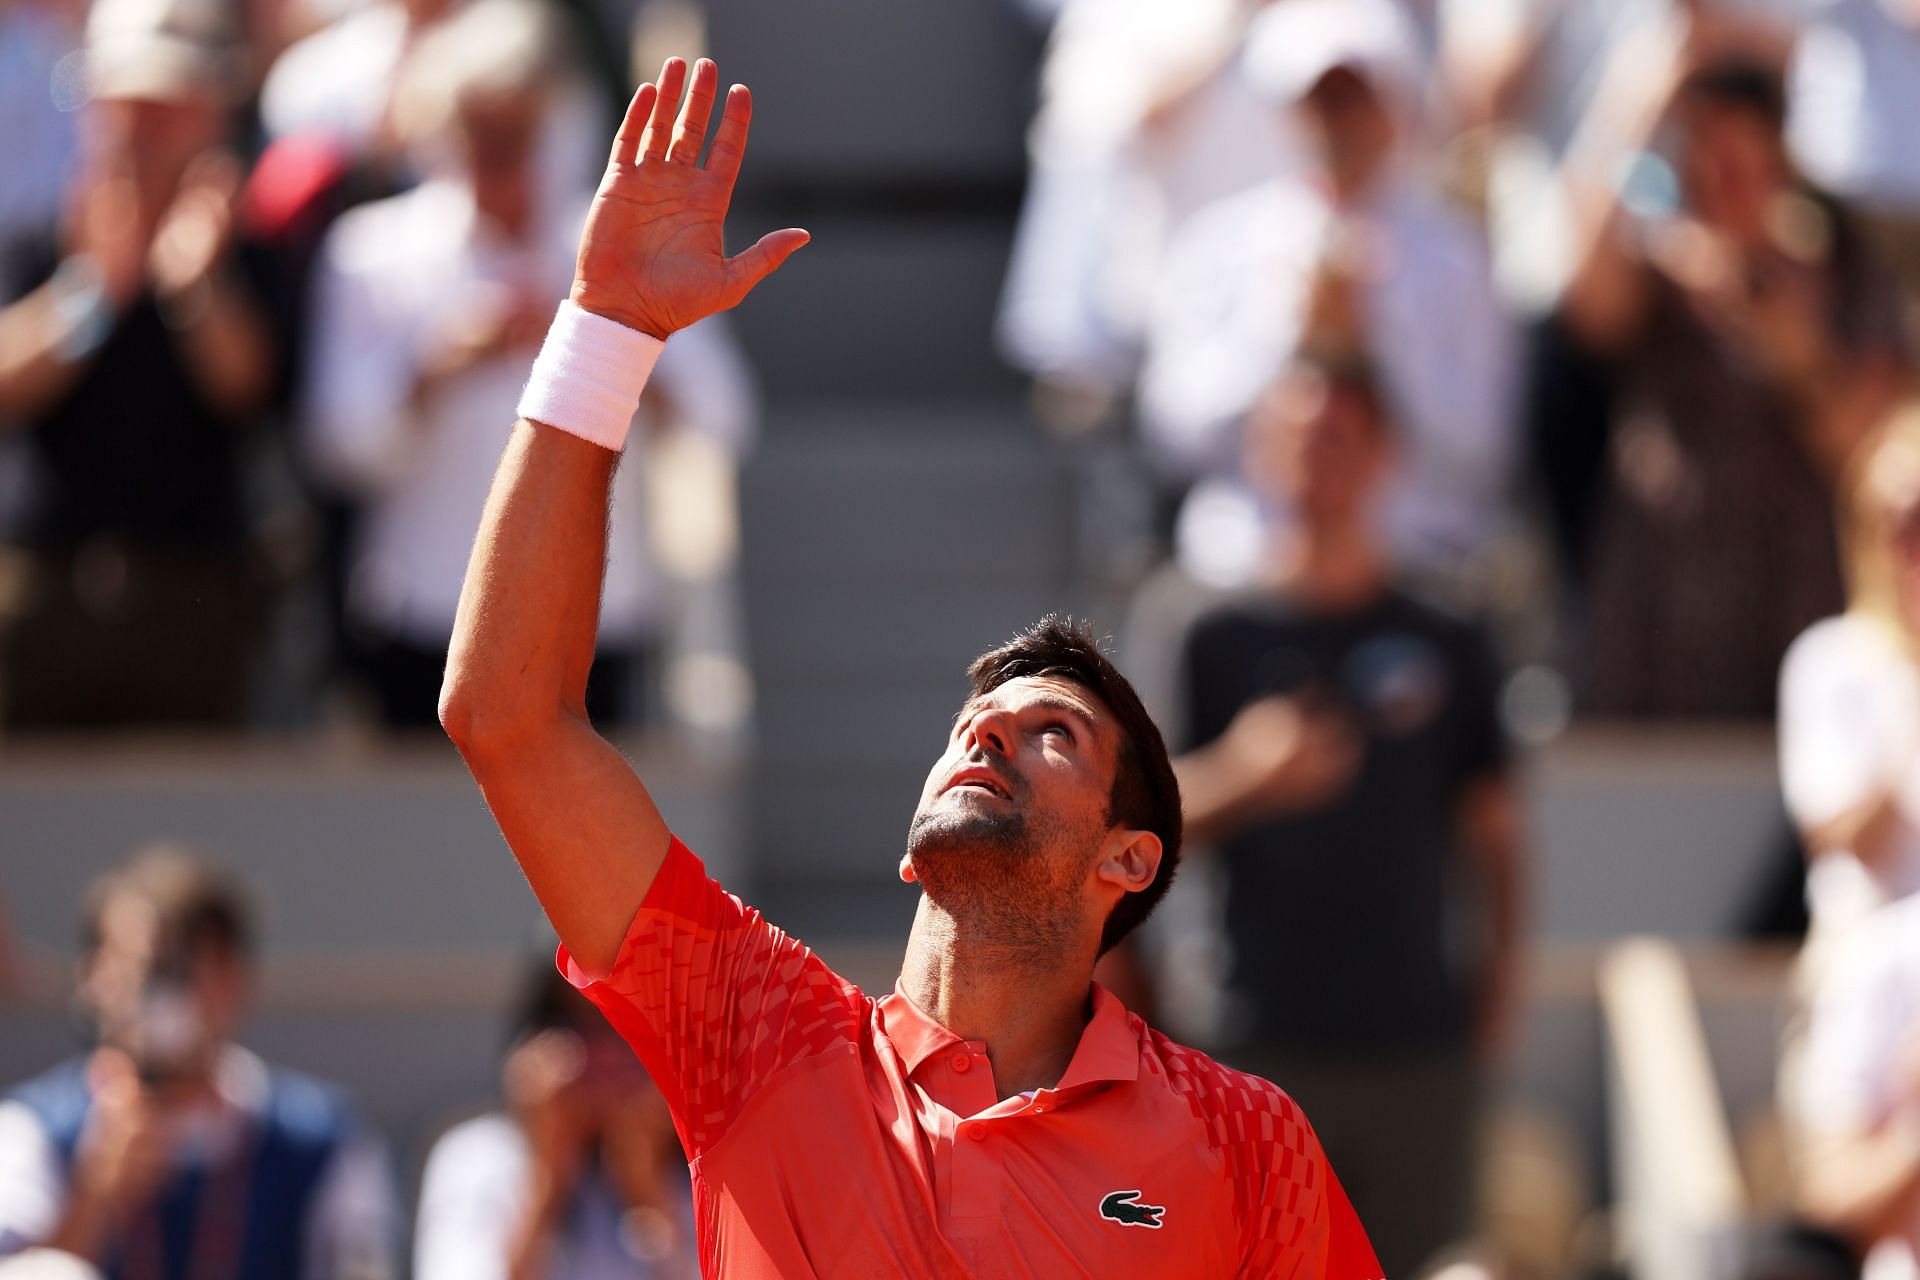 Novak Djokovic grabbed headlines once again at the 2023 French Open